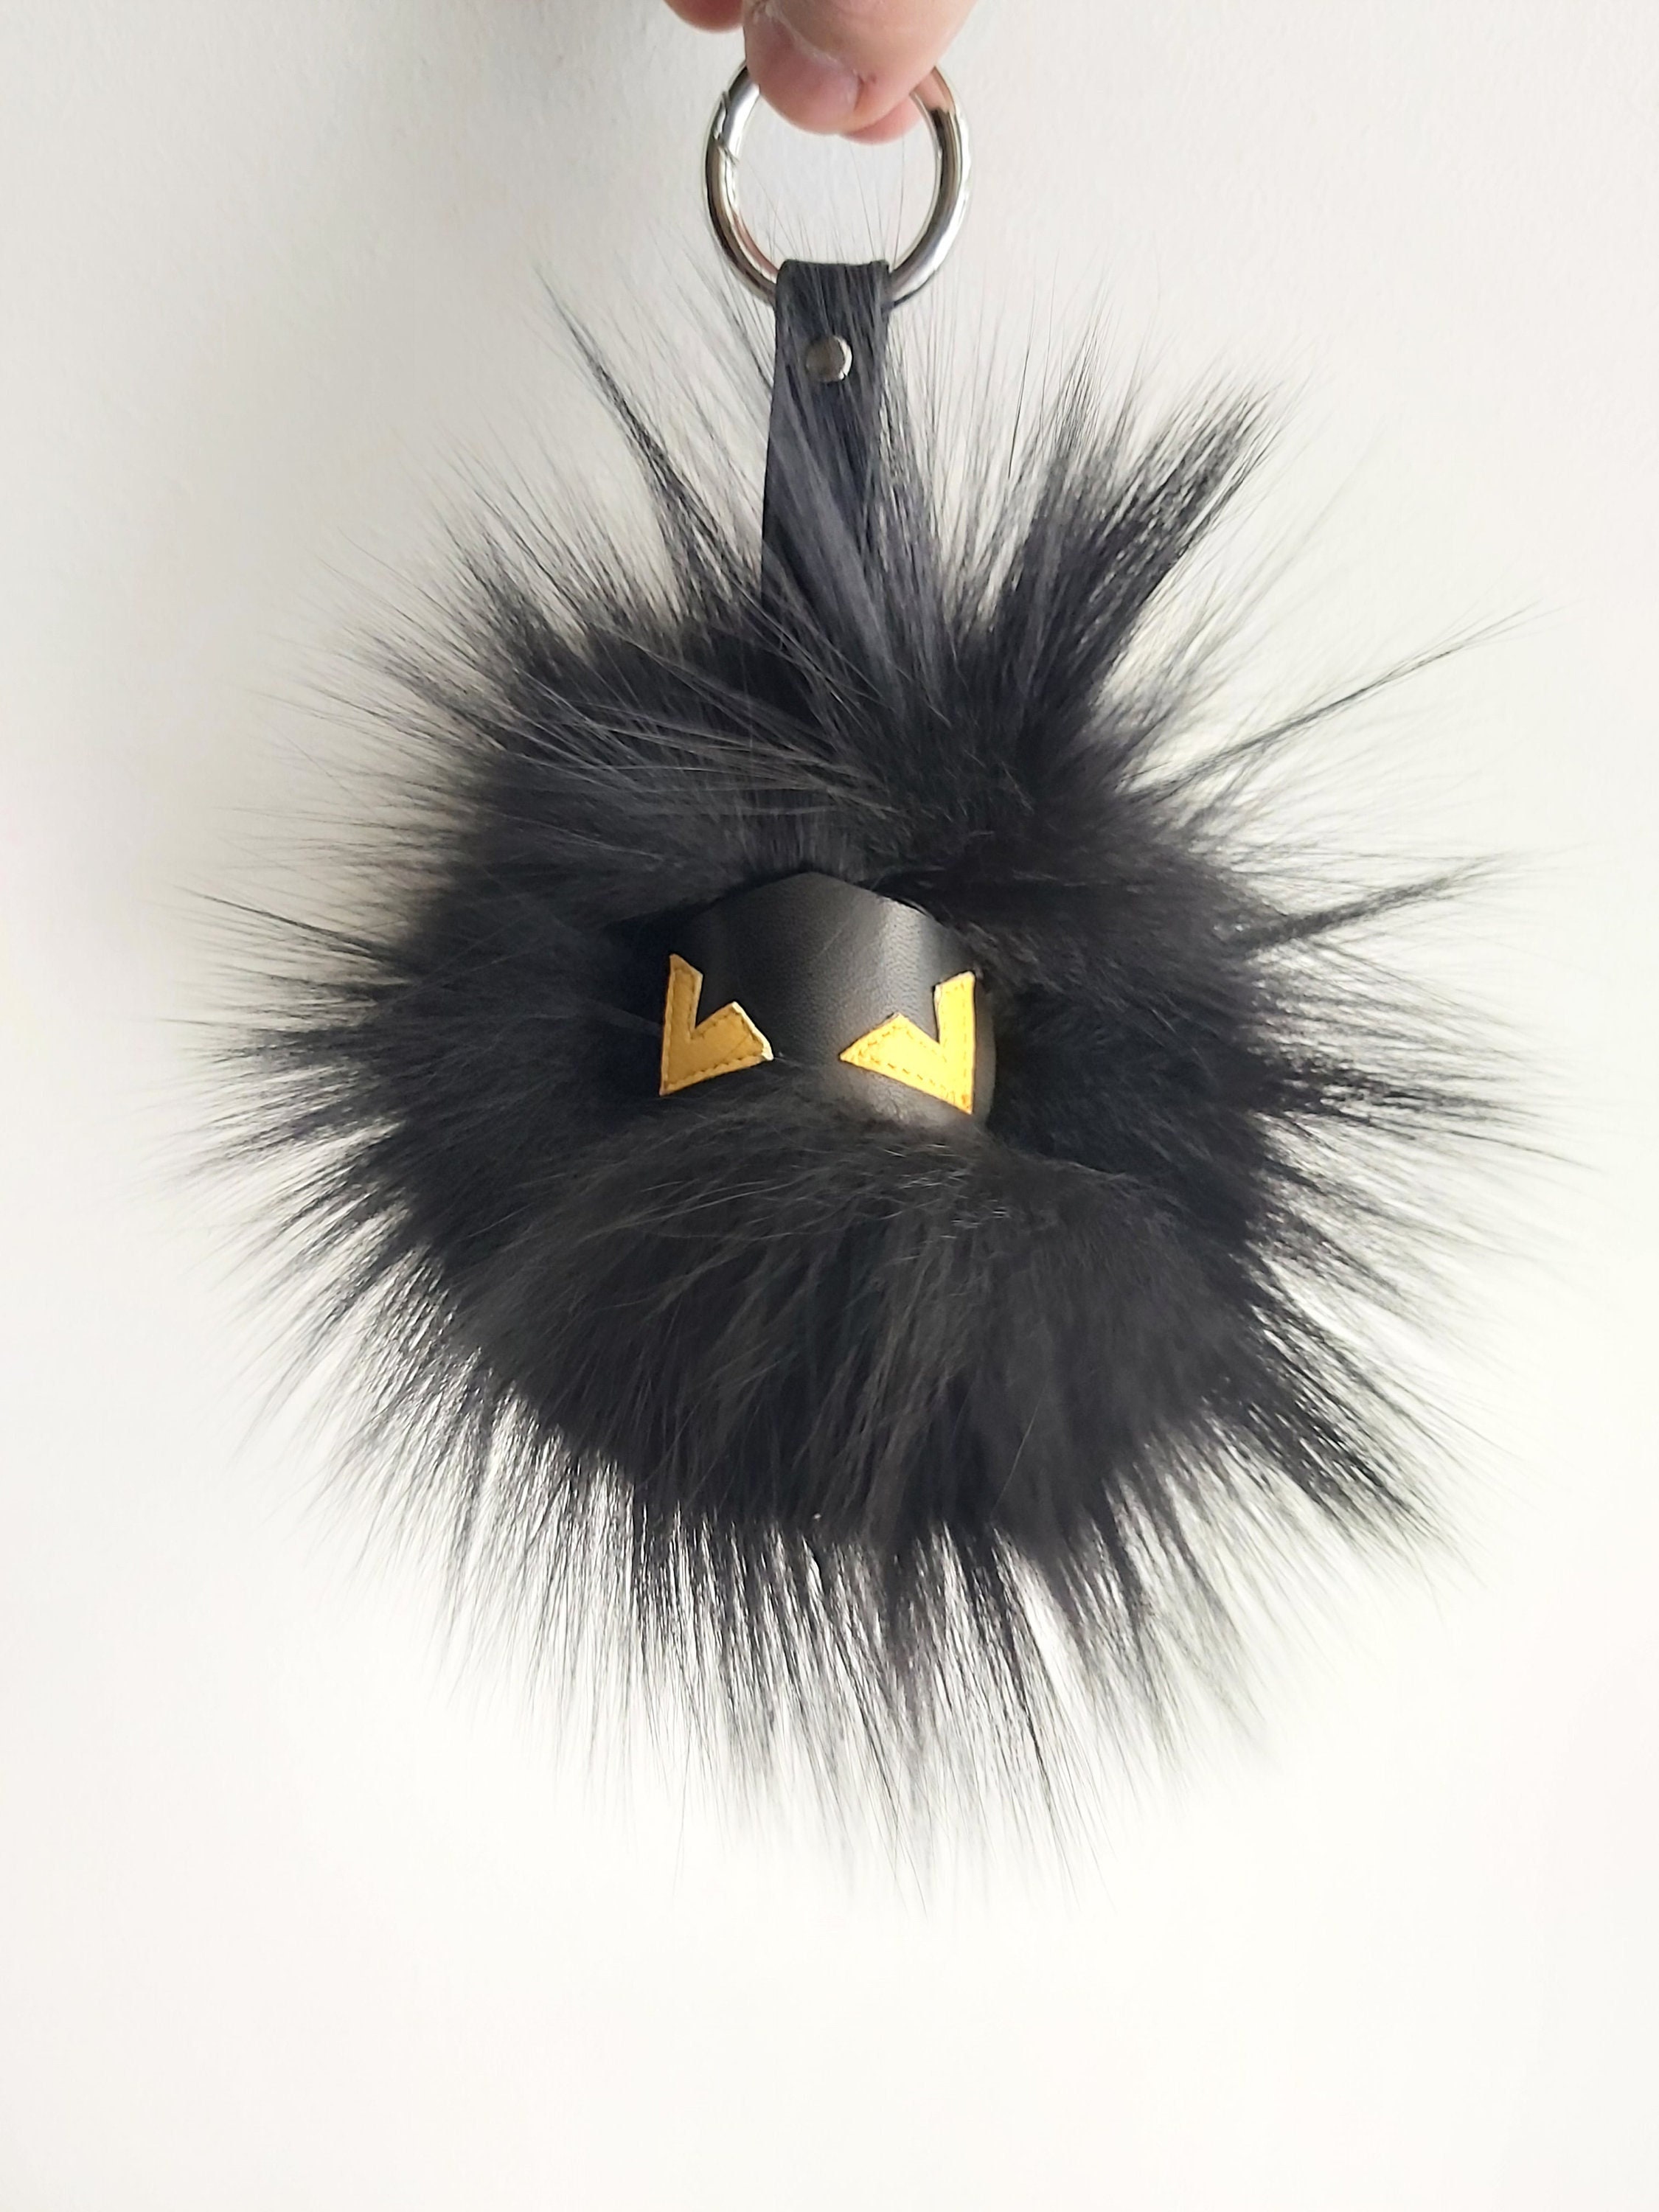 Monster Face Black Raccoon Fur Keychain Keyring Pompom With 